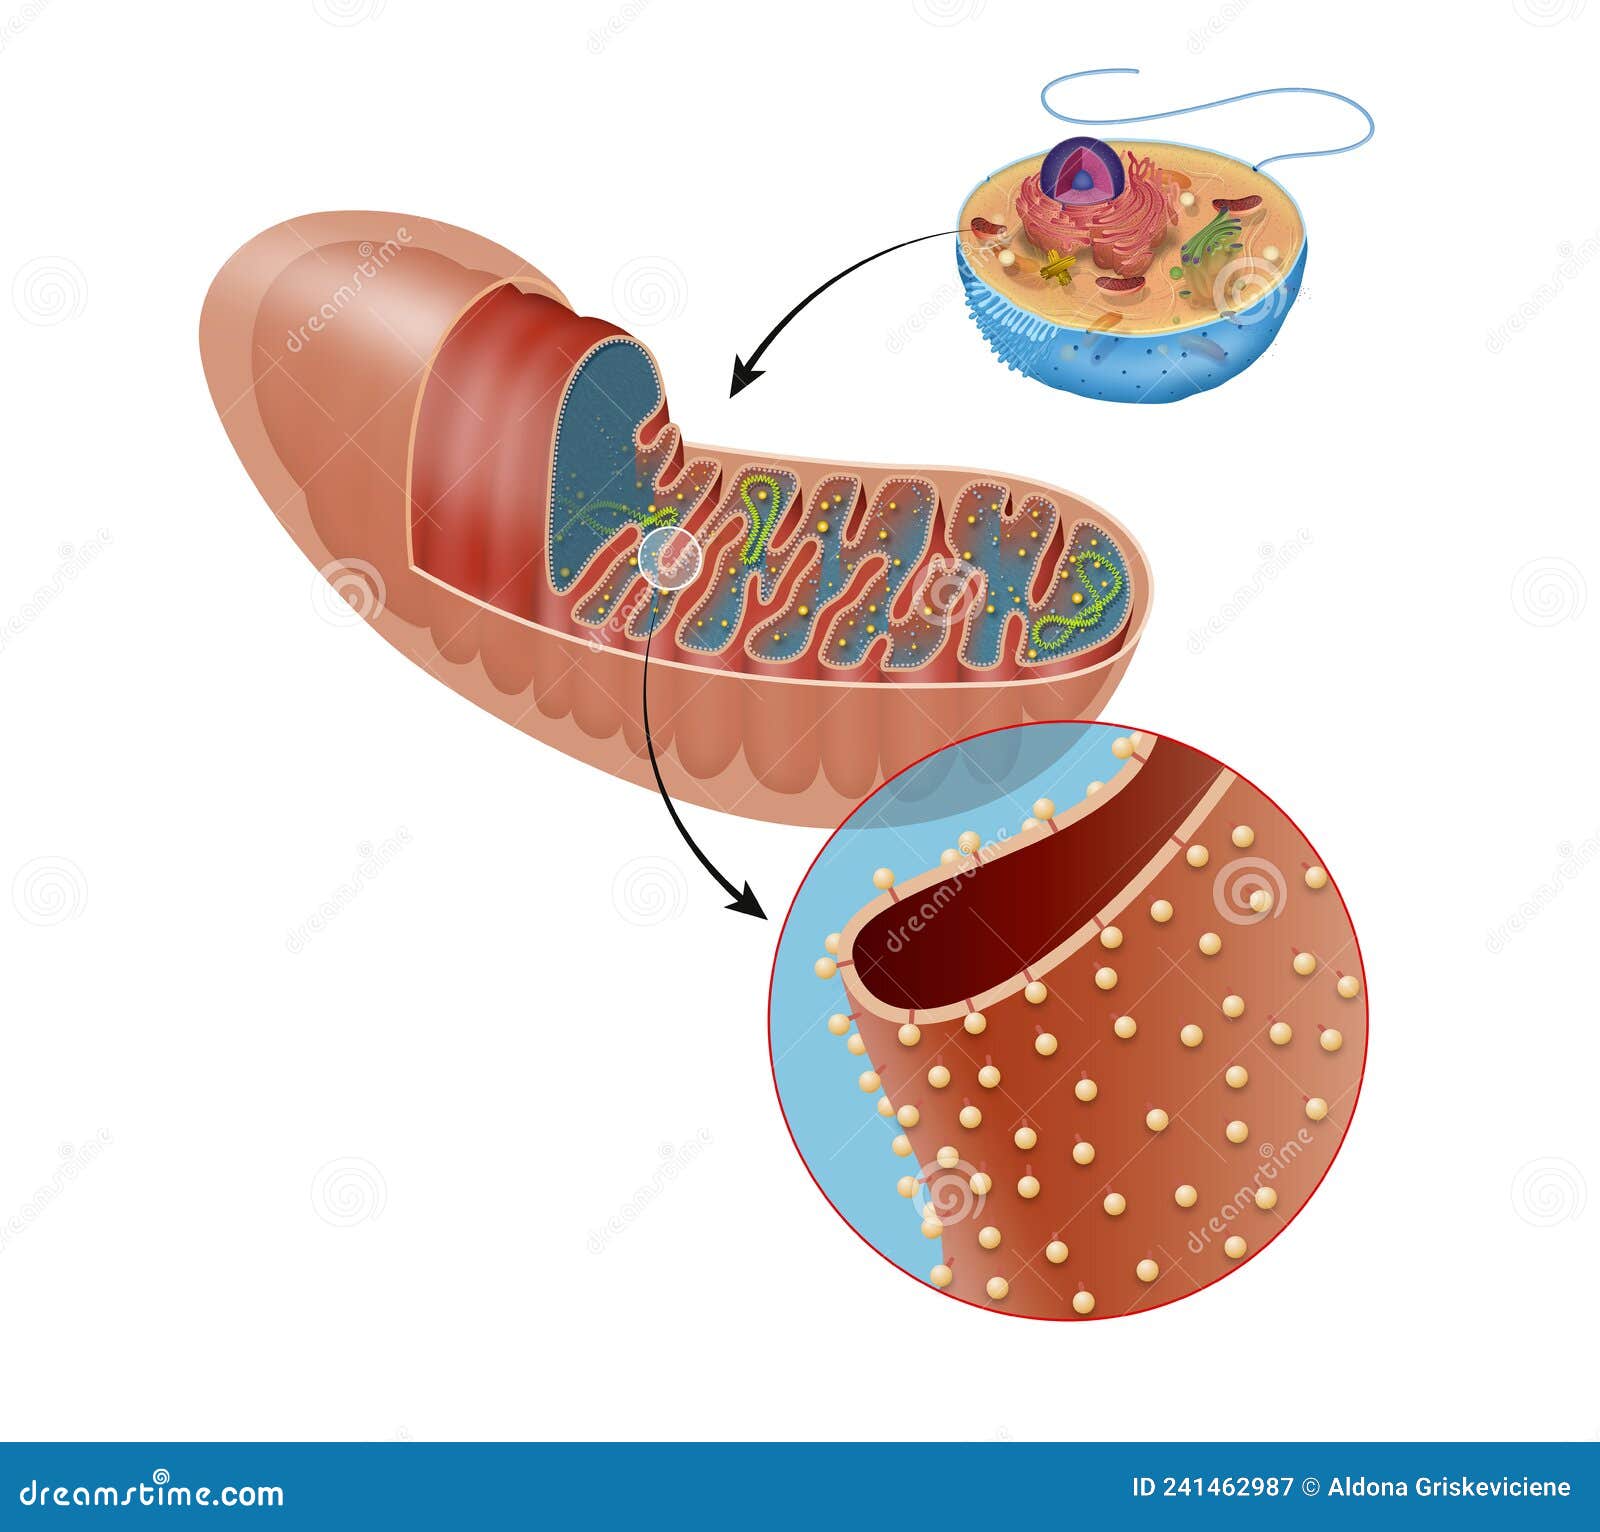 mitochondria have an inner and outer membrane, with an intermembrane space between them.